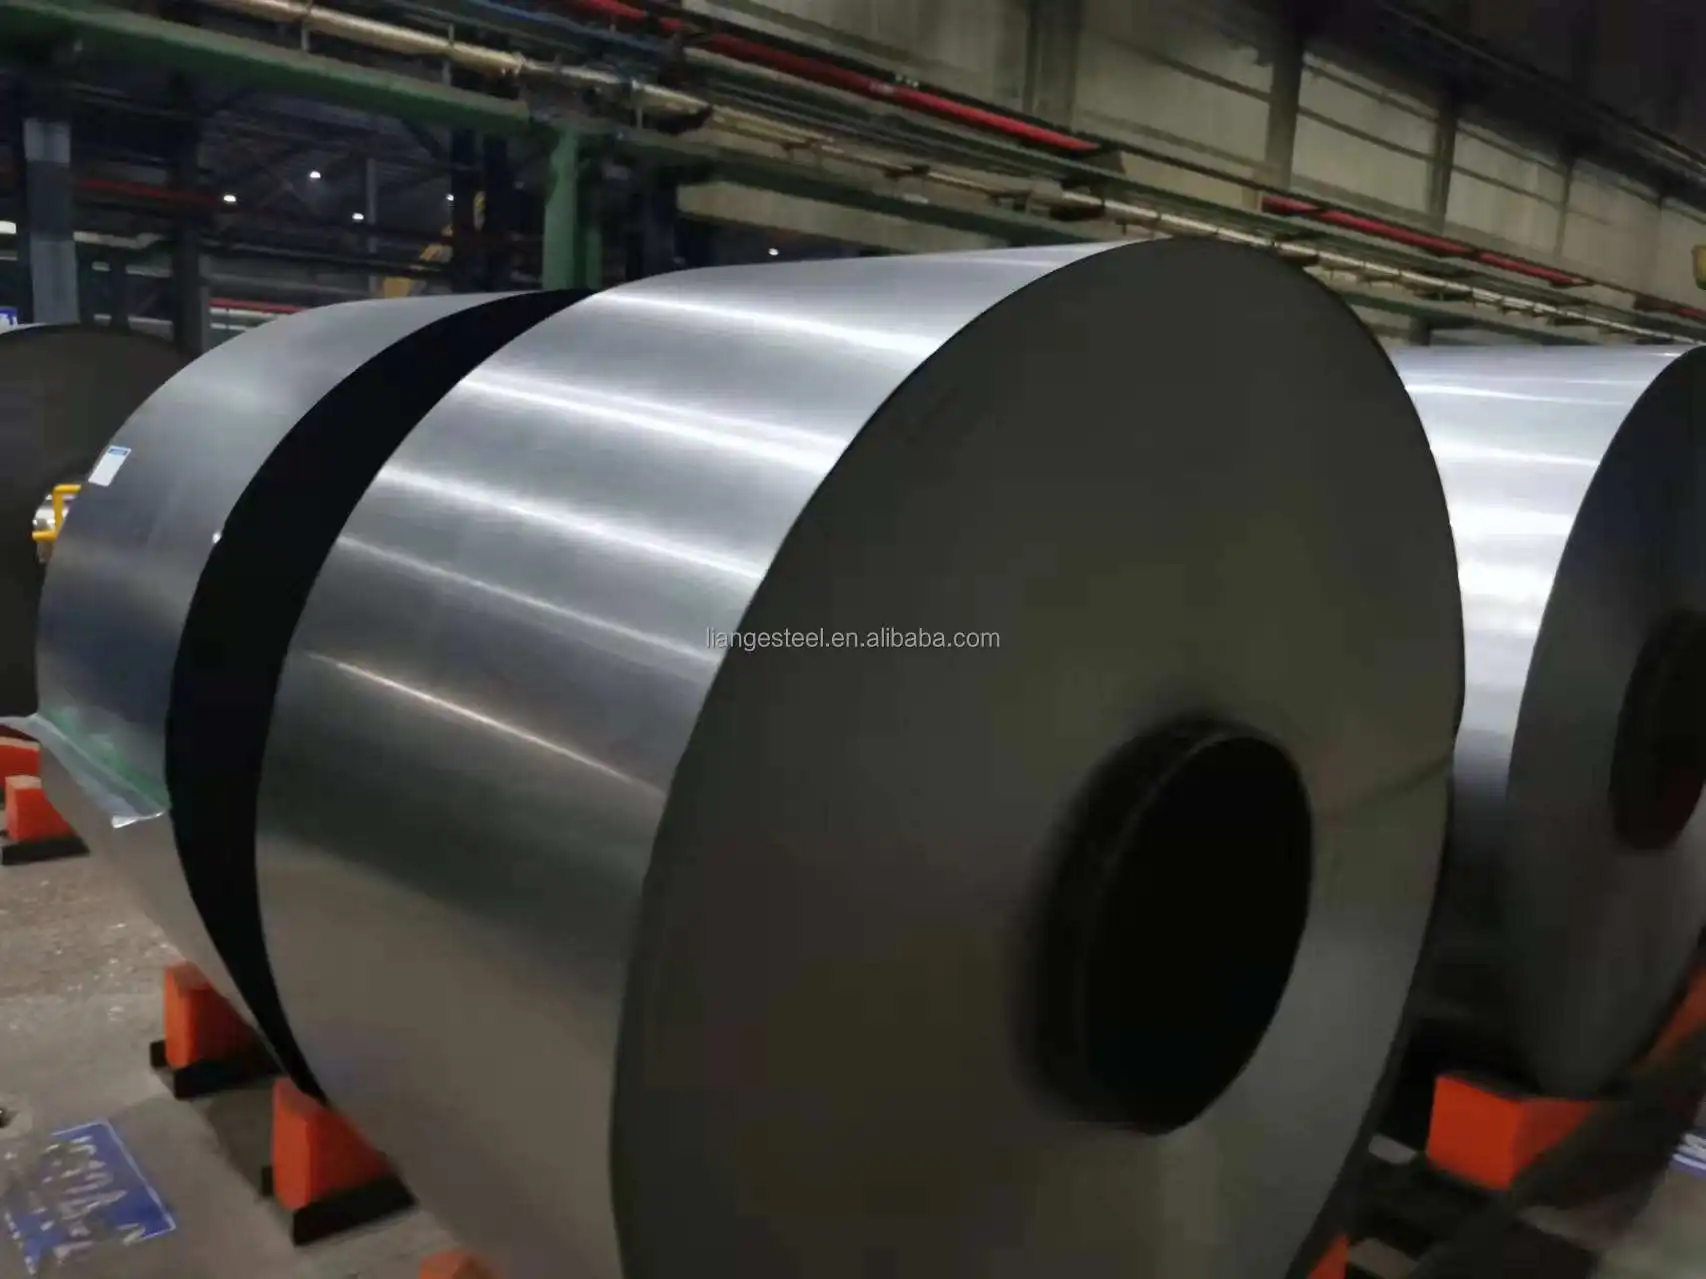 Hot sale prepainted Galvanized Sheet Coil Price 8mm Thick Galvanized Steel Hot Rolled Roll G60 Tinplate Coil for Deep Drawing